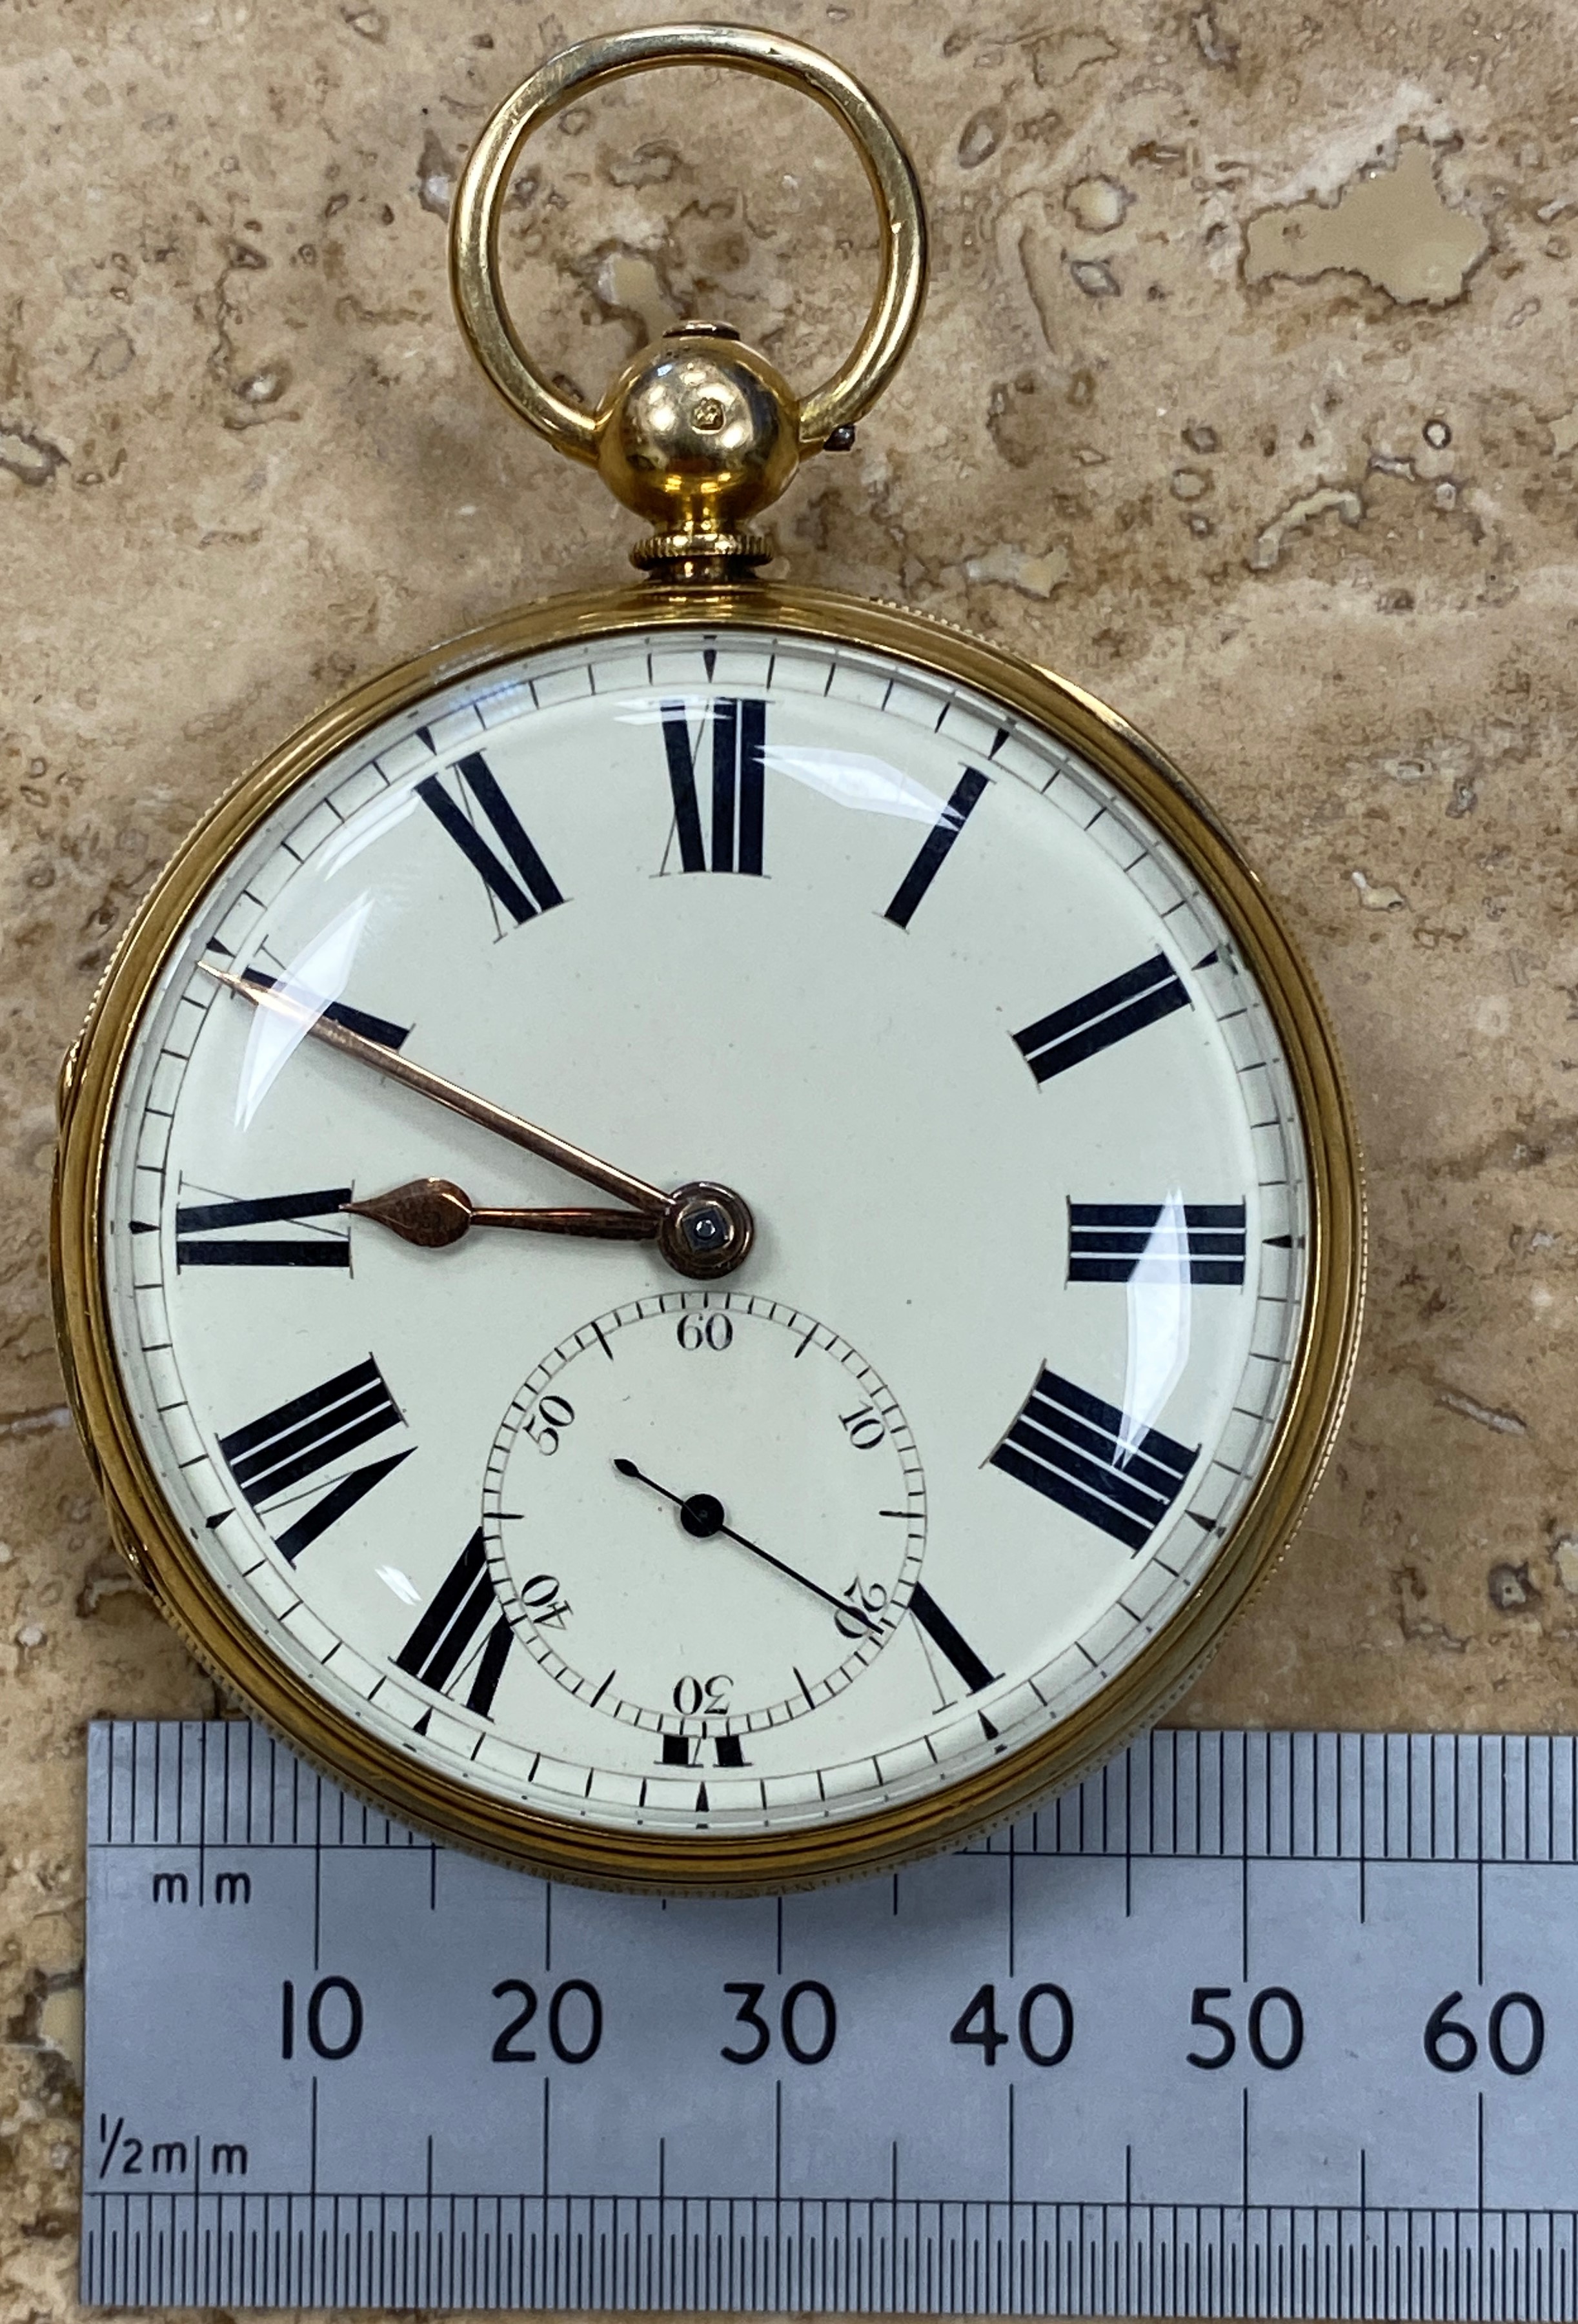 18ct Gold Fusee Pocket Watch by Gammon of Birmingham '1685', No.3584. - Image 46 of 48